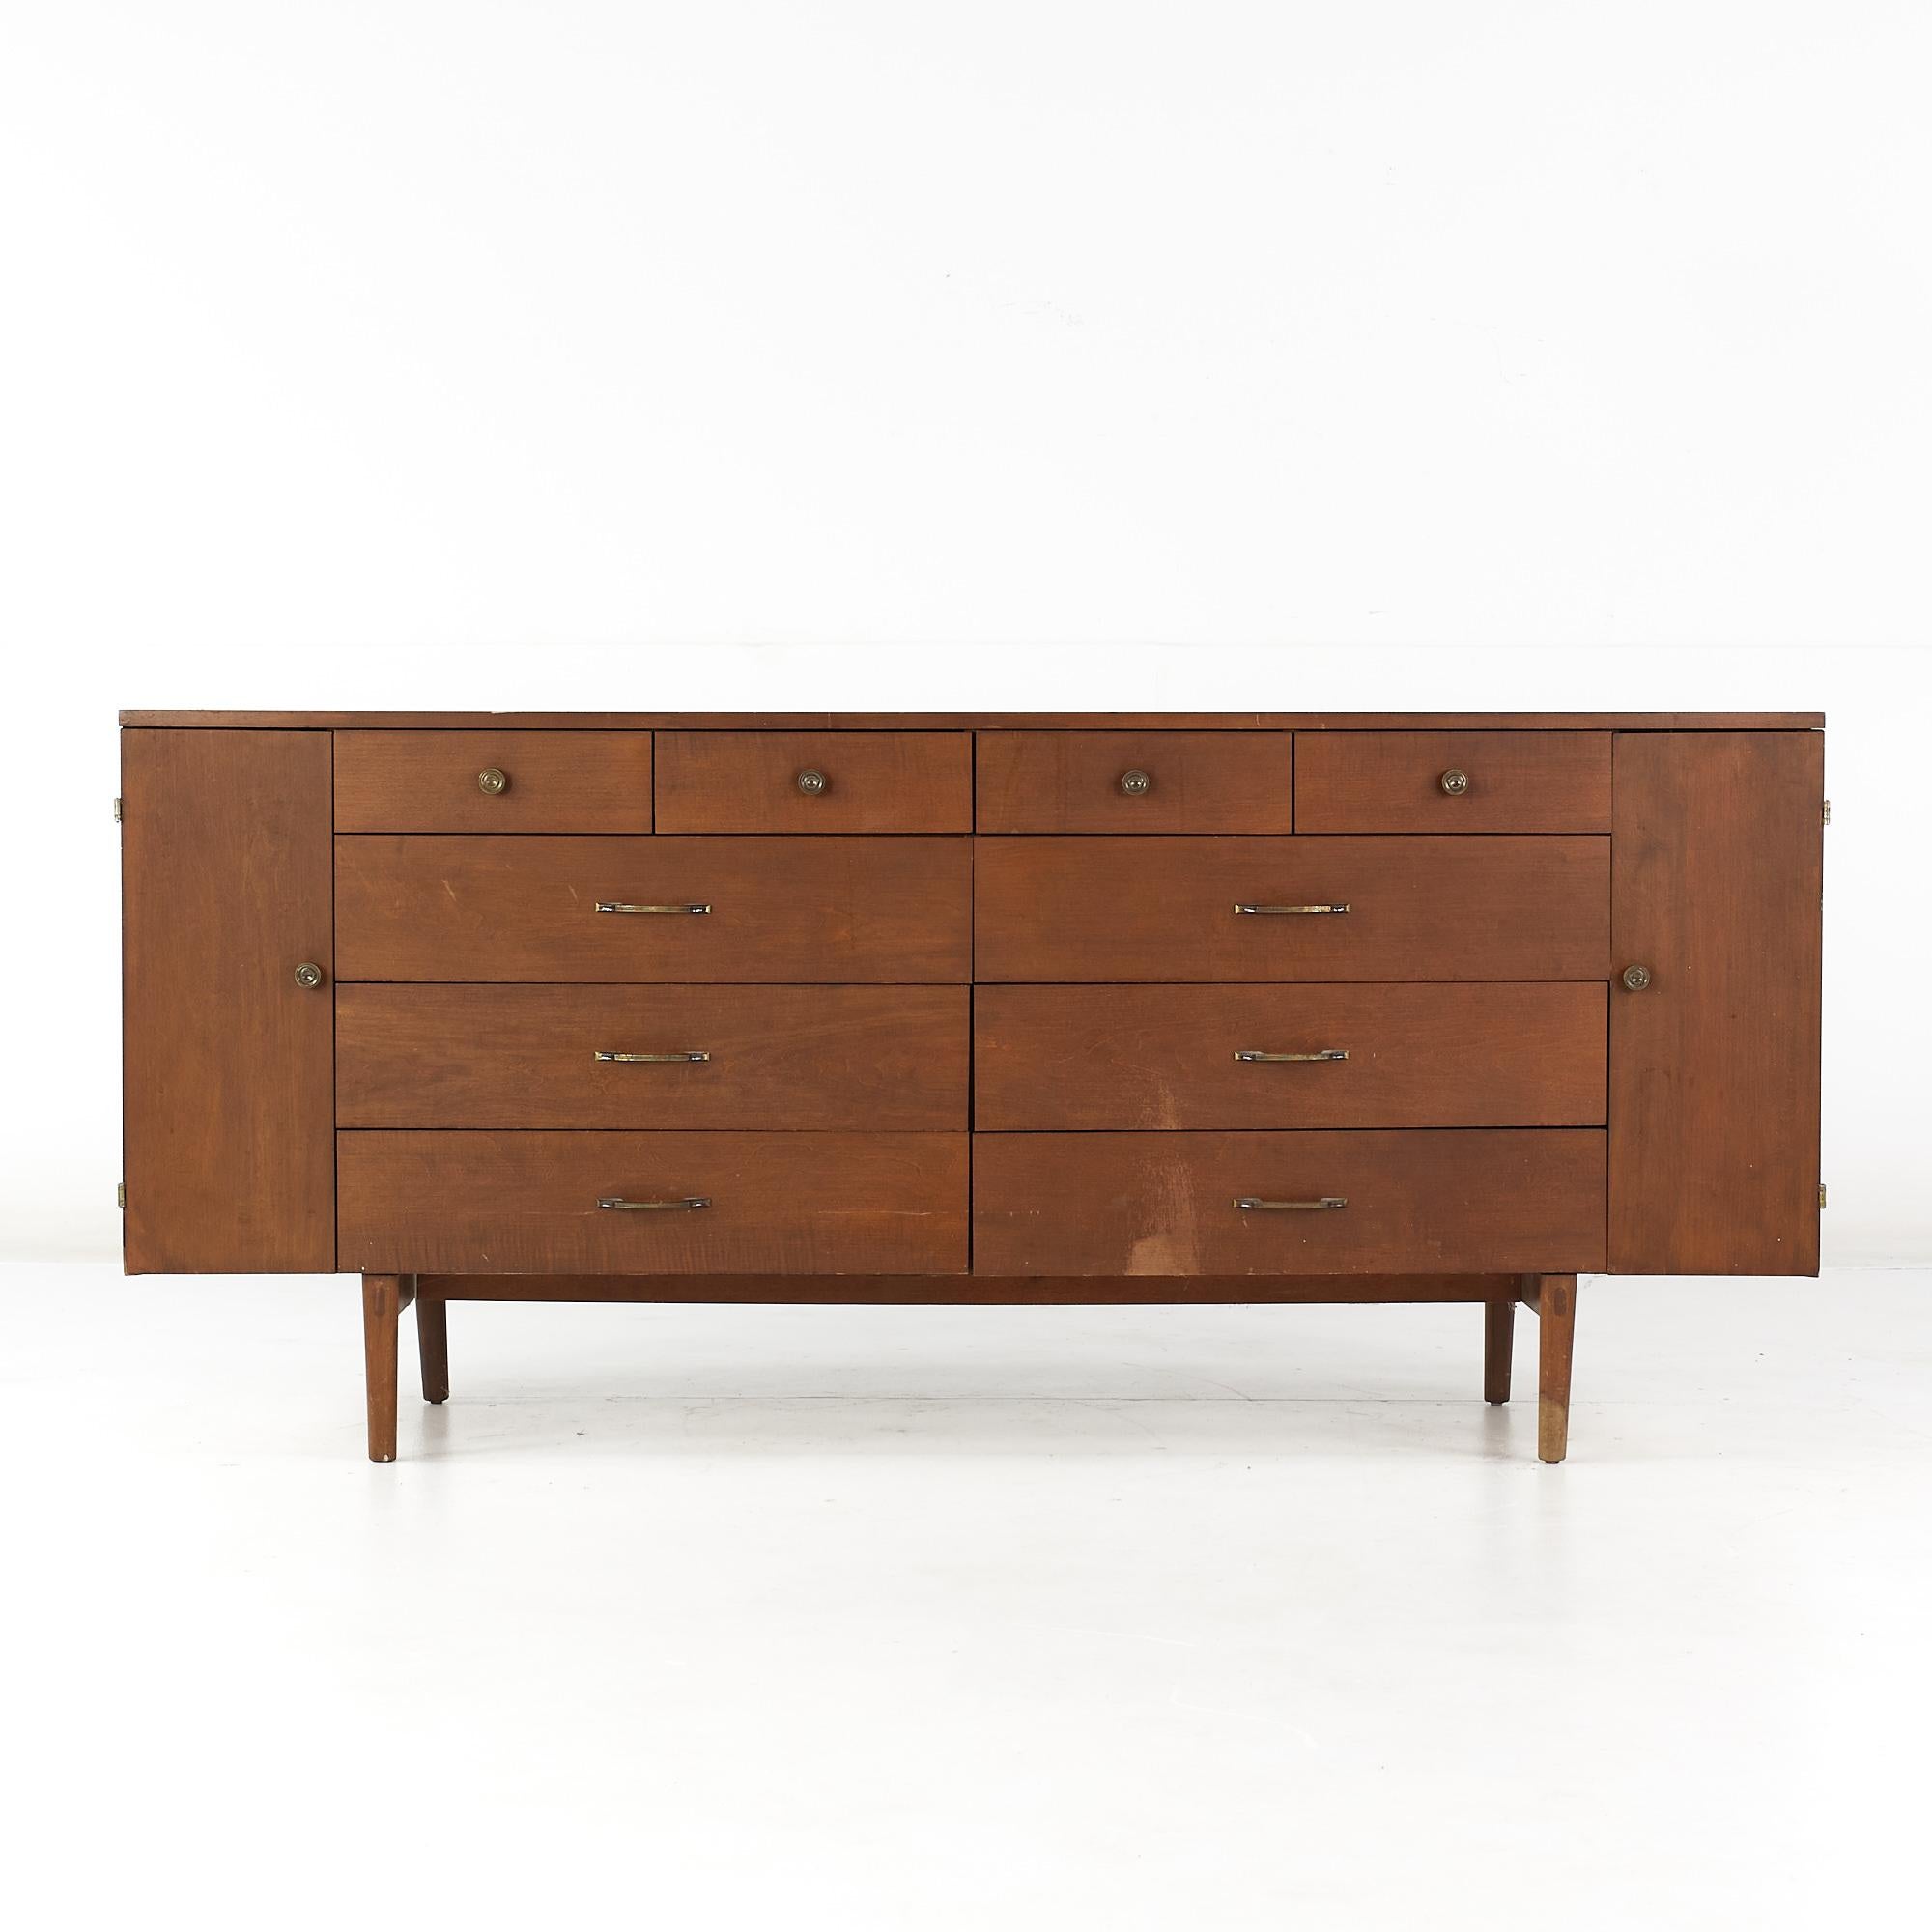 Paul McCobb mid-century 20 drawer lowboy dresser.

This lowboy dresser measures: 72 wide x 18.25 deep x 32 inches high.

All pieces of furniture can be had in what we call restored vintage condition. That means the piece is restored upon